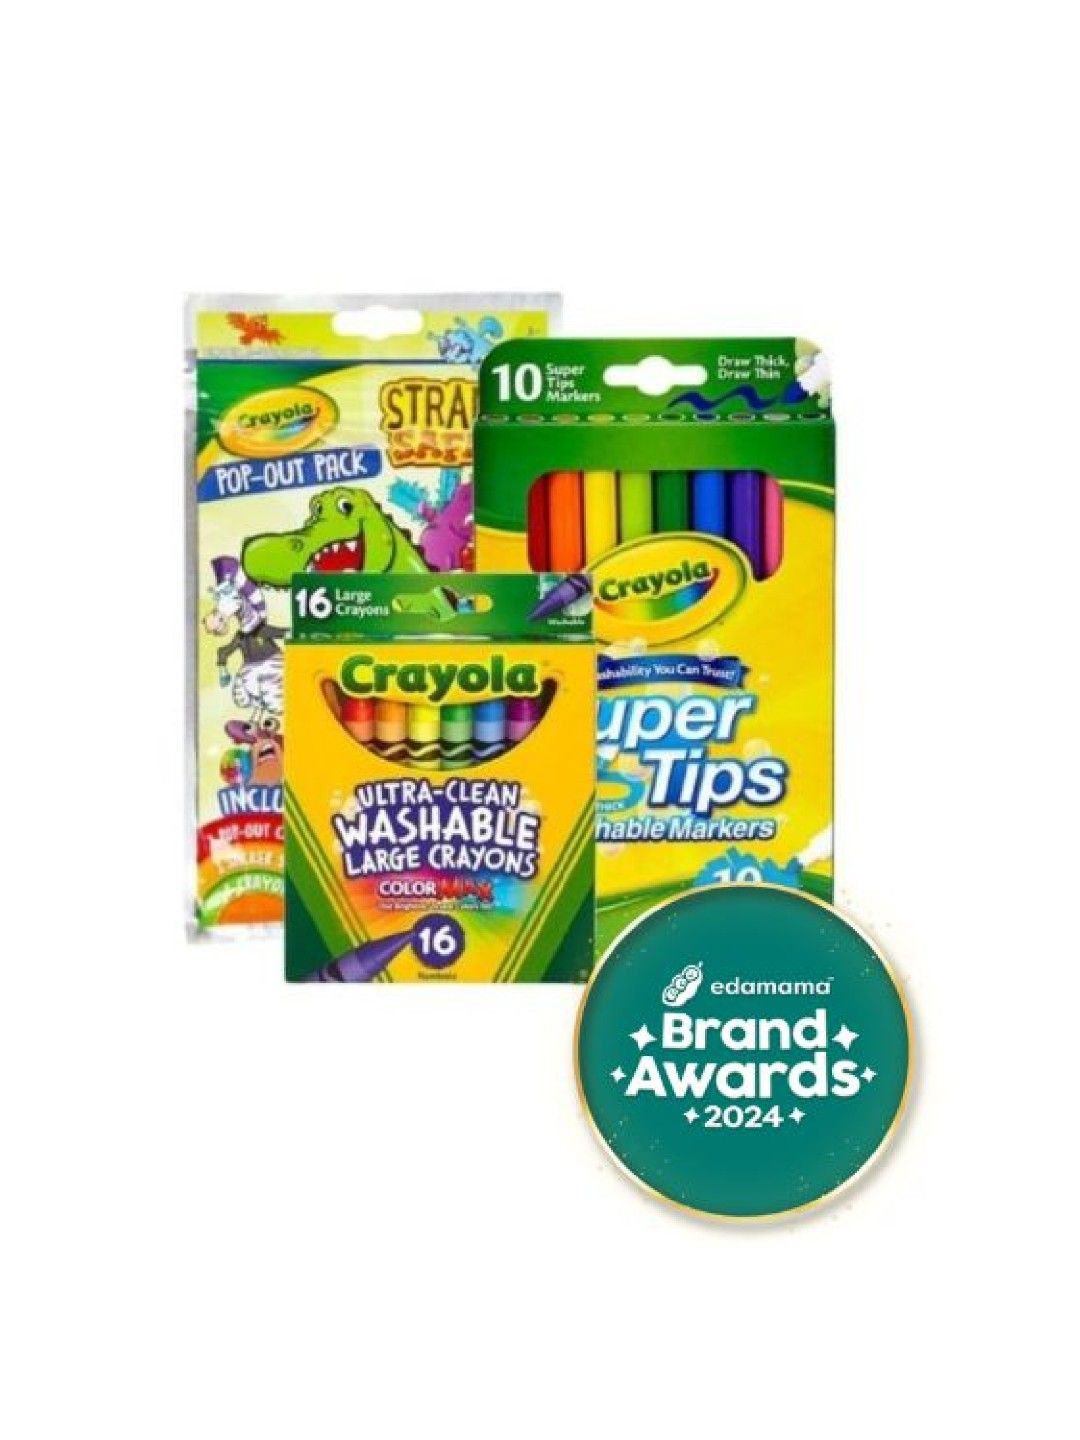 Crayola Washable Crayons (16 count) + Supertips (10 count) + Value Pack